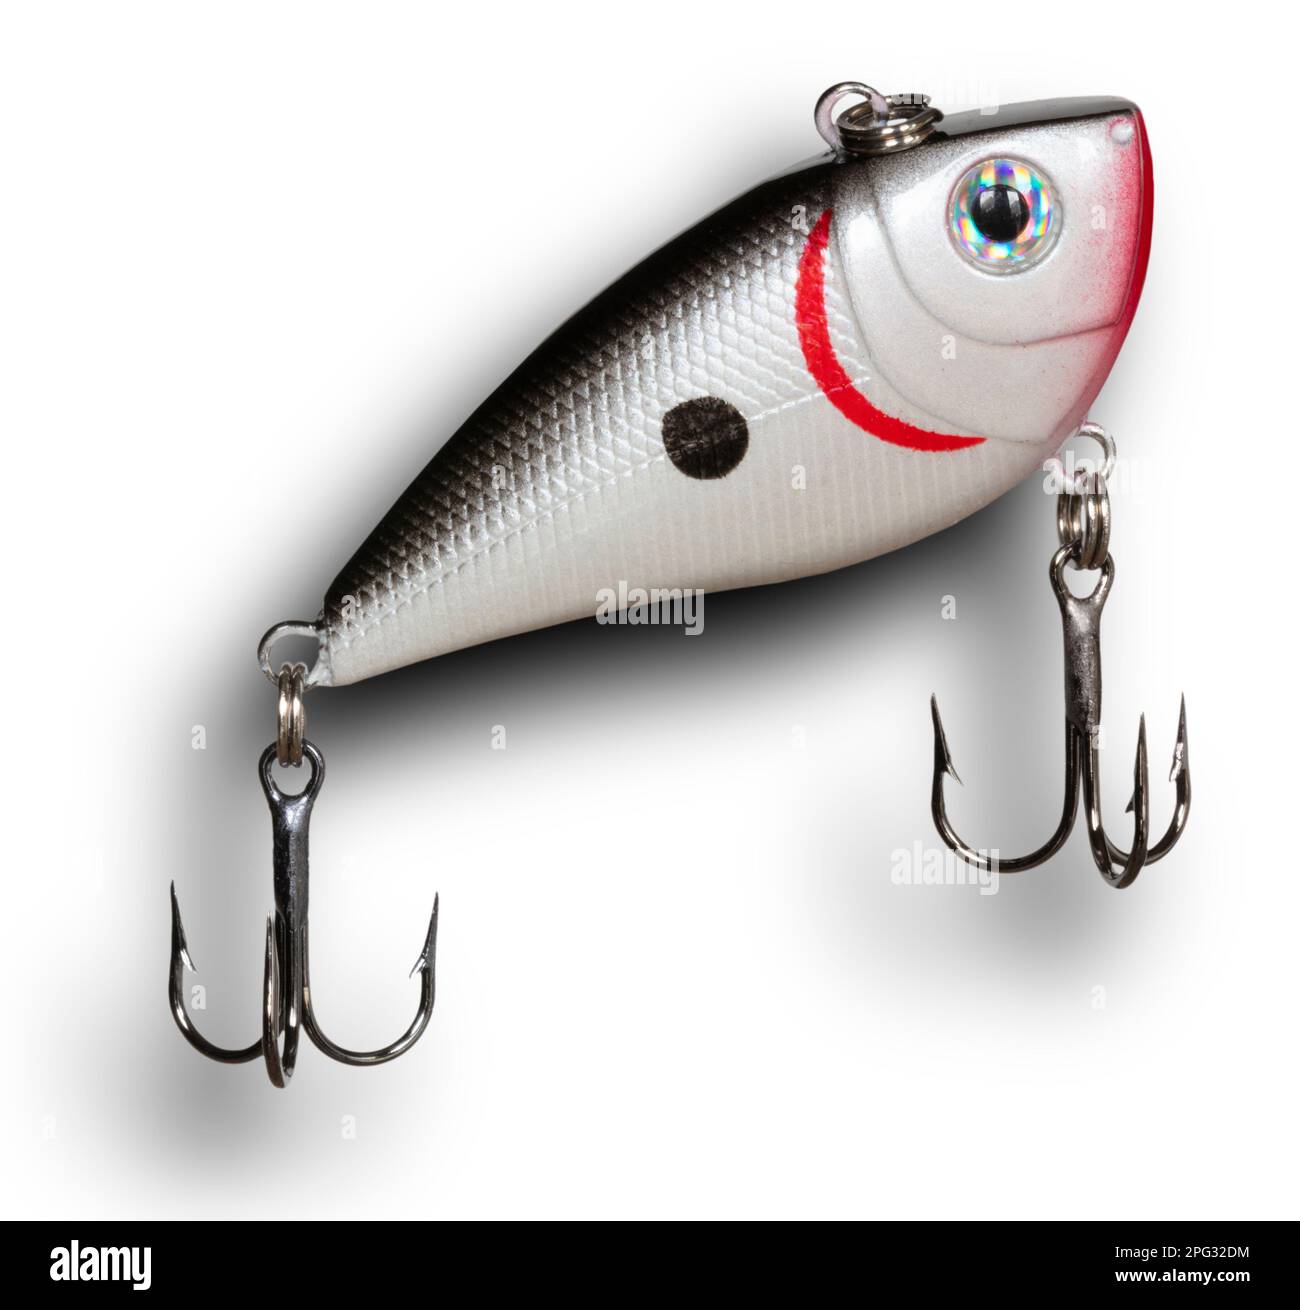 https://c8.alamy.com/comp/2PG32DM/shadow-behind-a-gray-red-and-white-artificial-fishing-lure-with-two-treble-hooks-pointing-toward-the-surface-2PG32DM.jpg